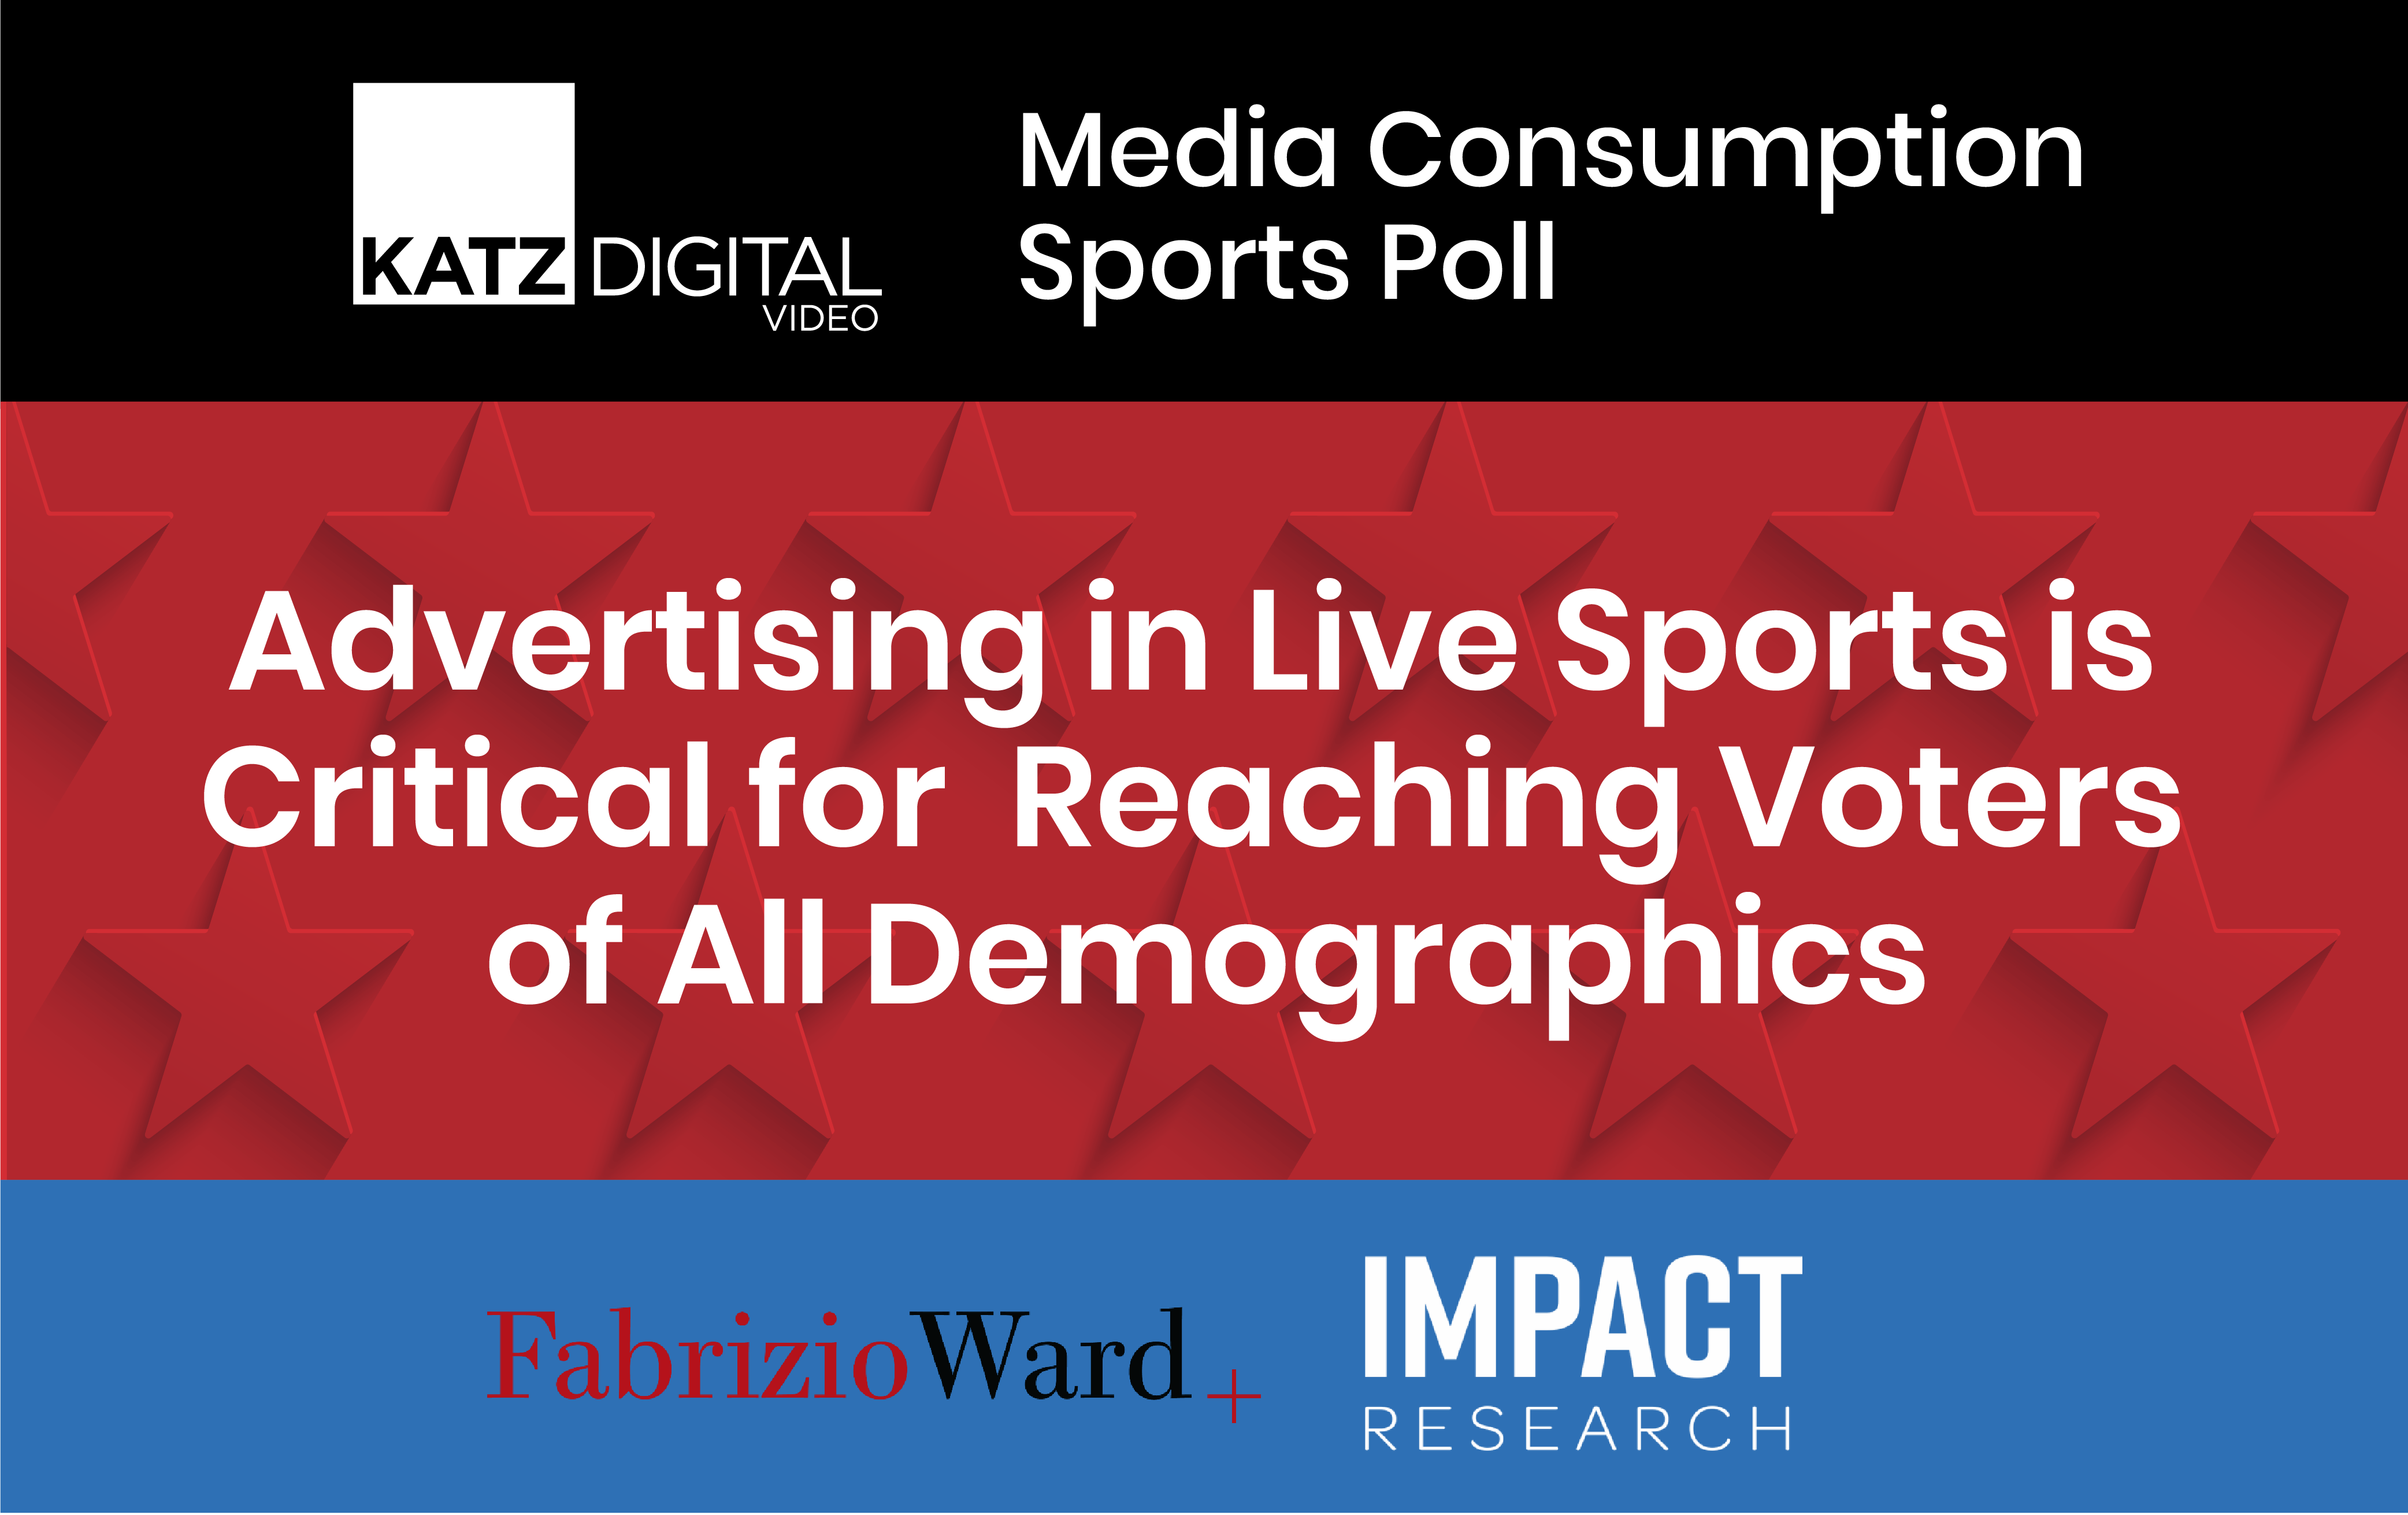 Advertising in Live Sports is Critical for Reaching Voters of All Demographics